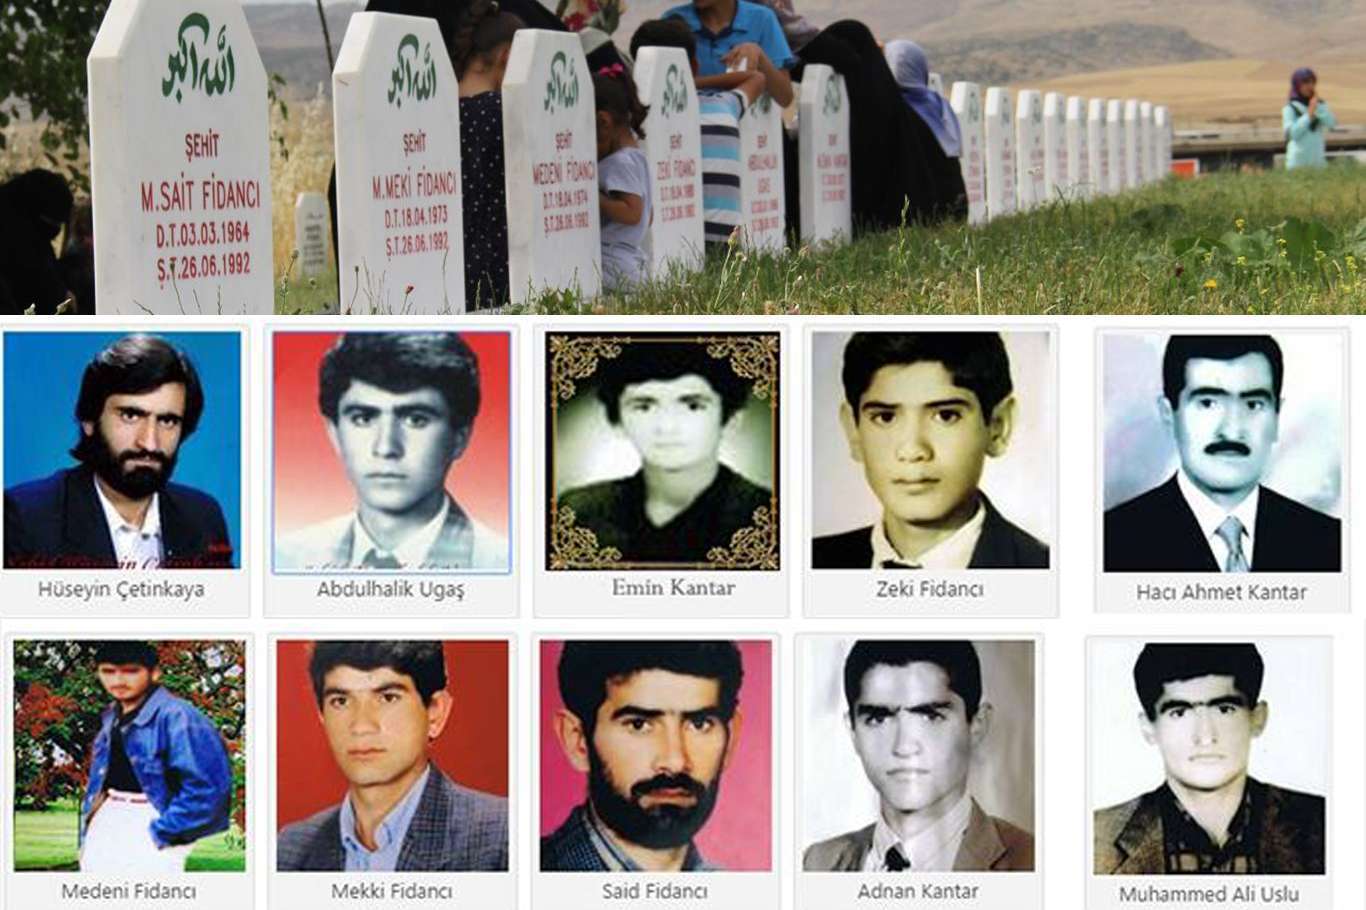 Today marks the 30th anniversary of Susa Mosque Massacre